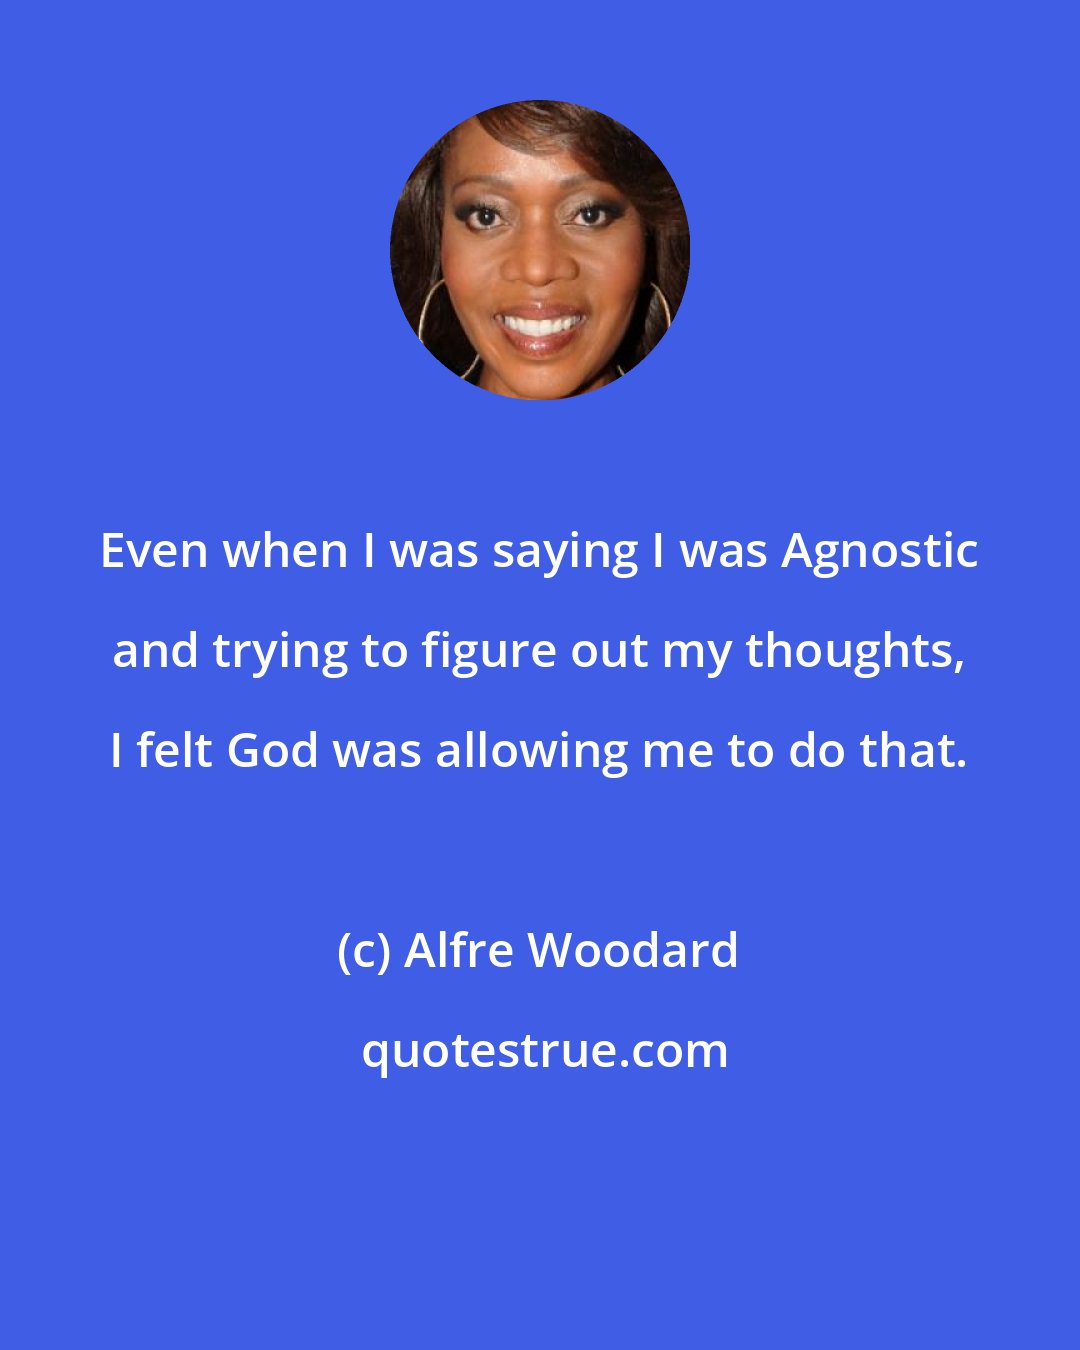 Alfre Woodard: Even when I was saying I was Agnostic and trying to figure out my thoughts, I felt God was allowing me to do that.